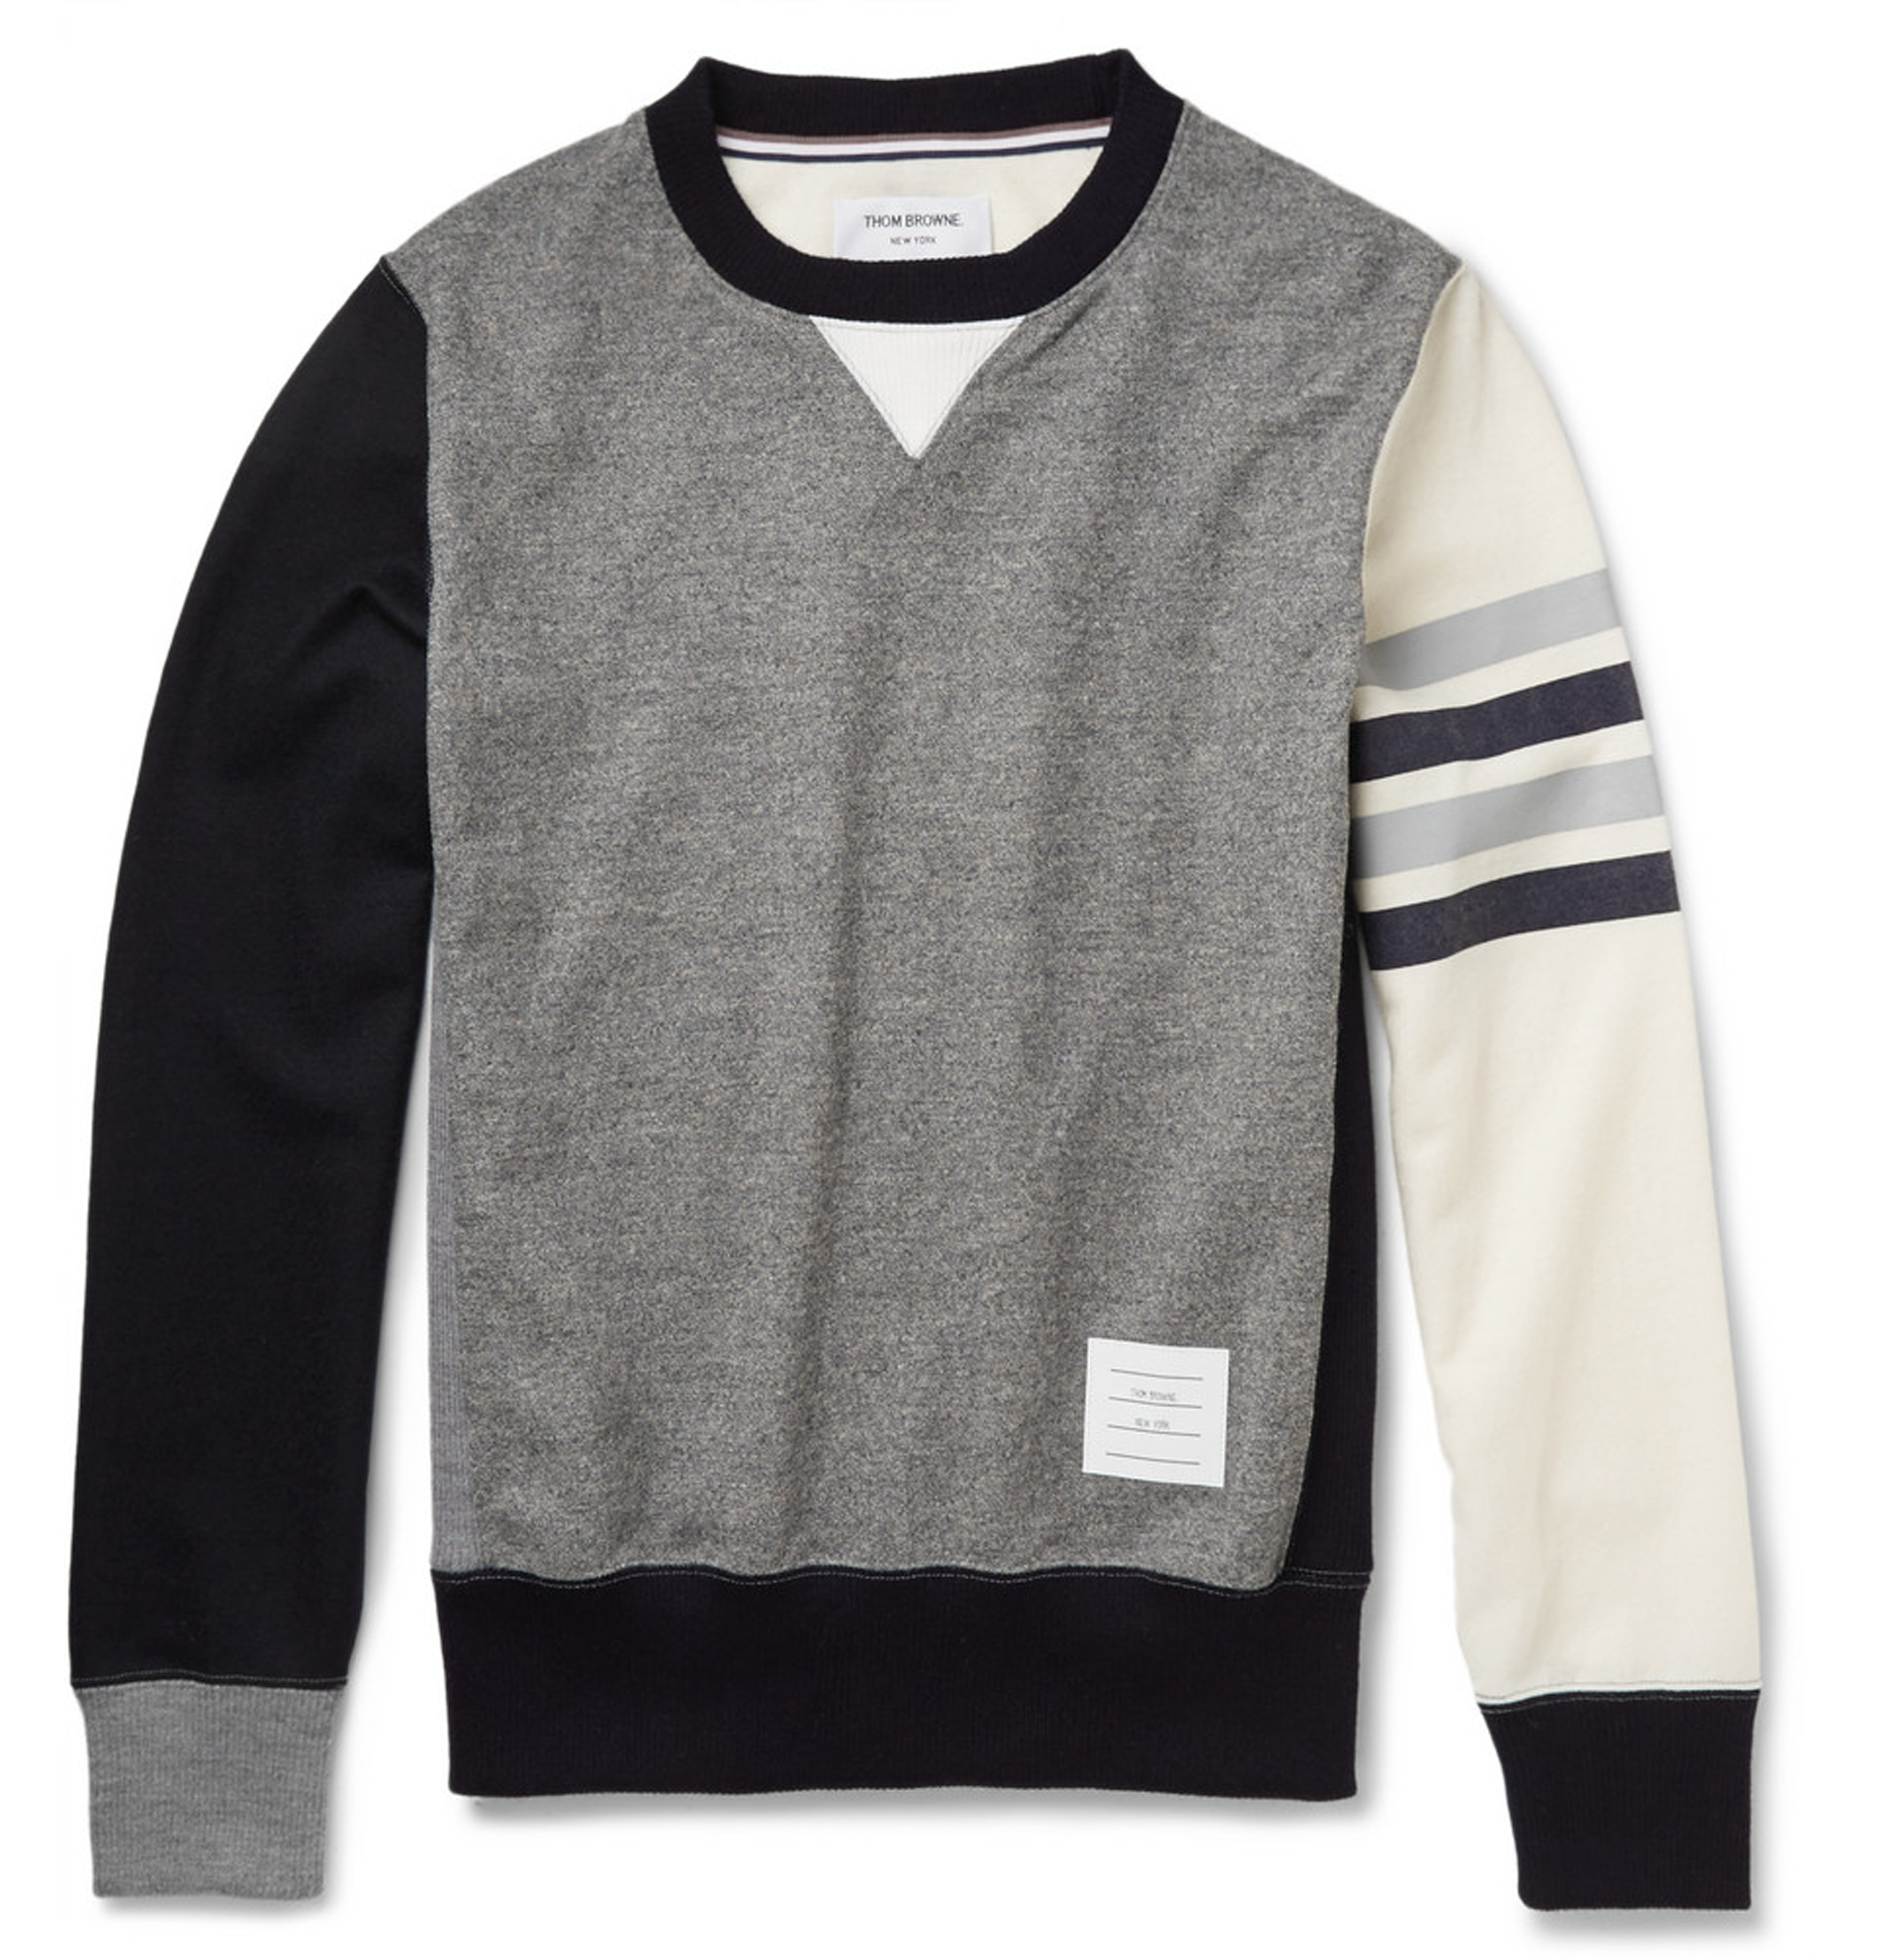 Mr Porter x Thom Browne's Exclusive Fall/Winter 2014 Capsule Collection ...